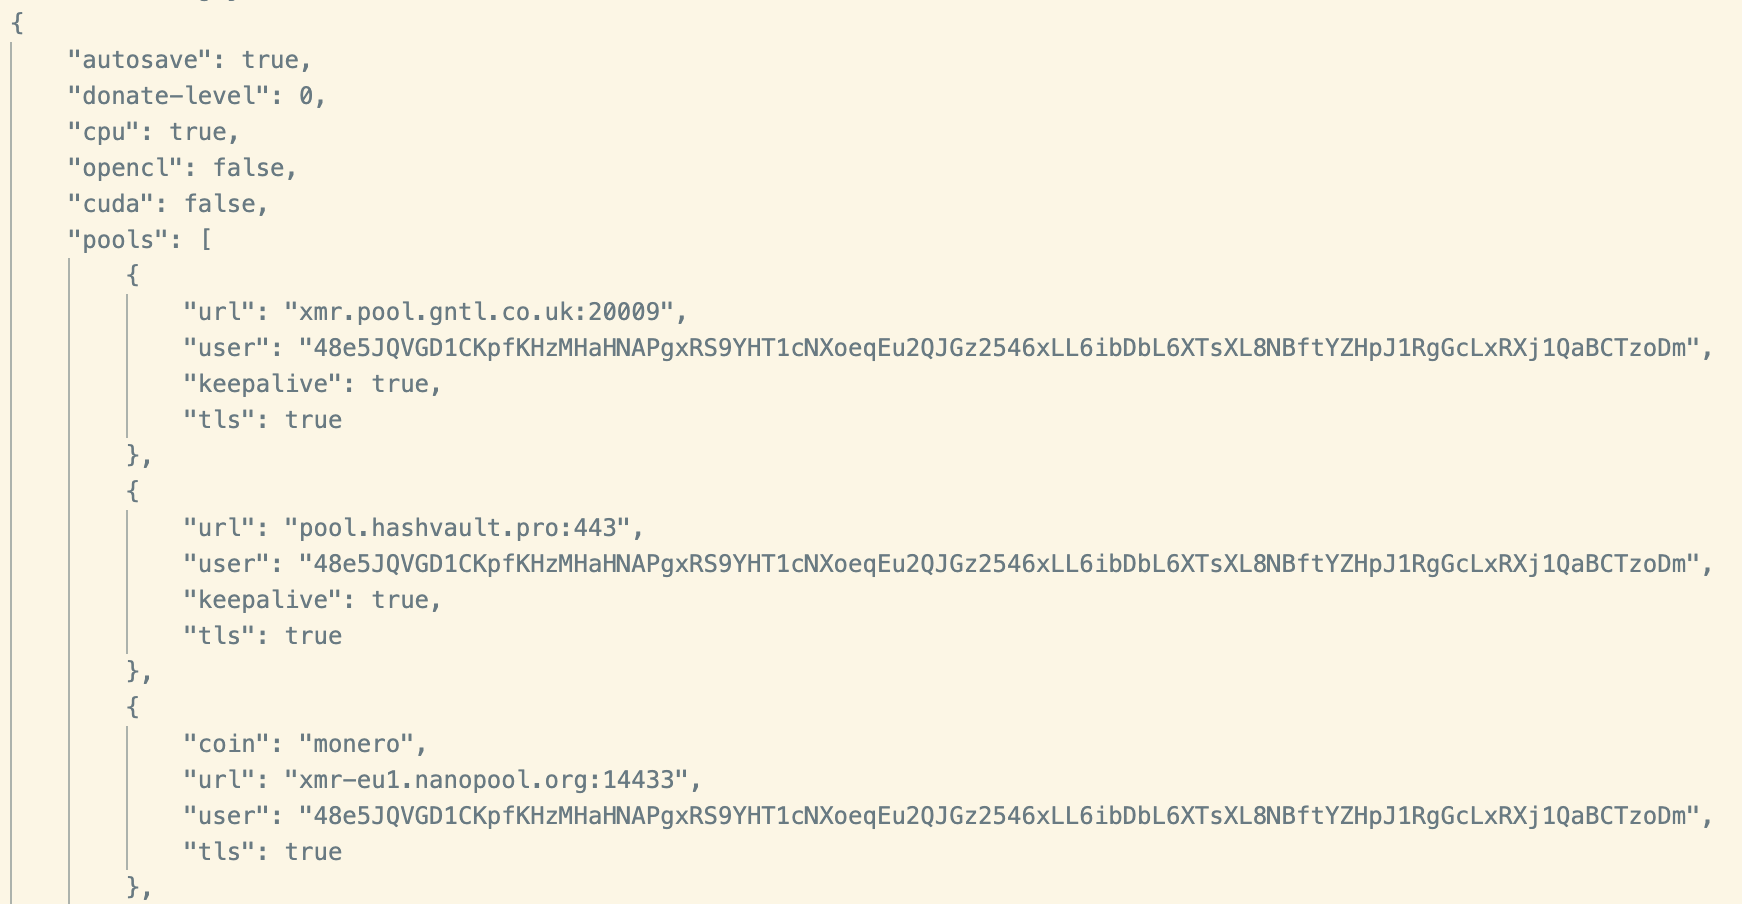 Snippet of mining configuration<br />
